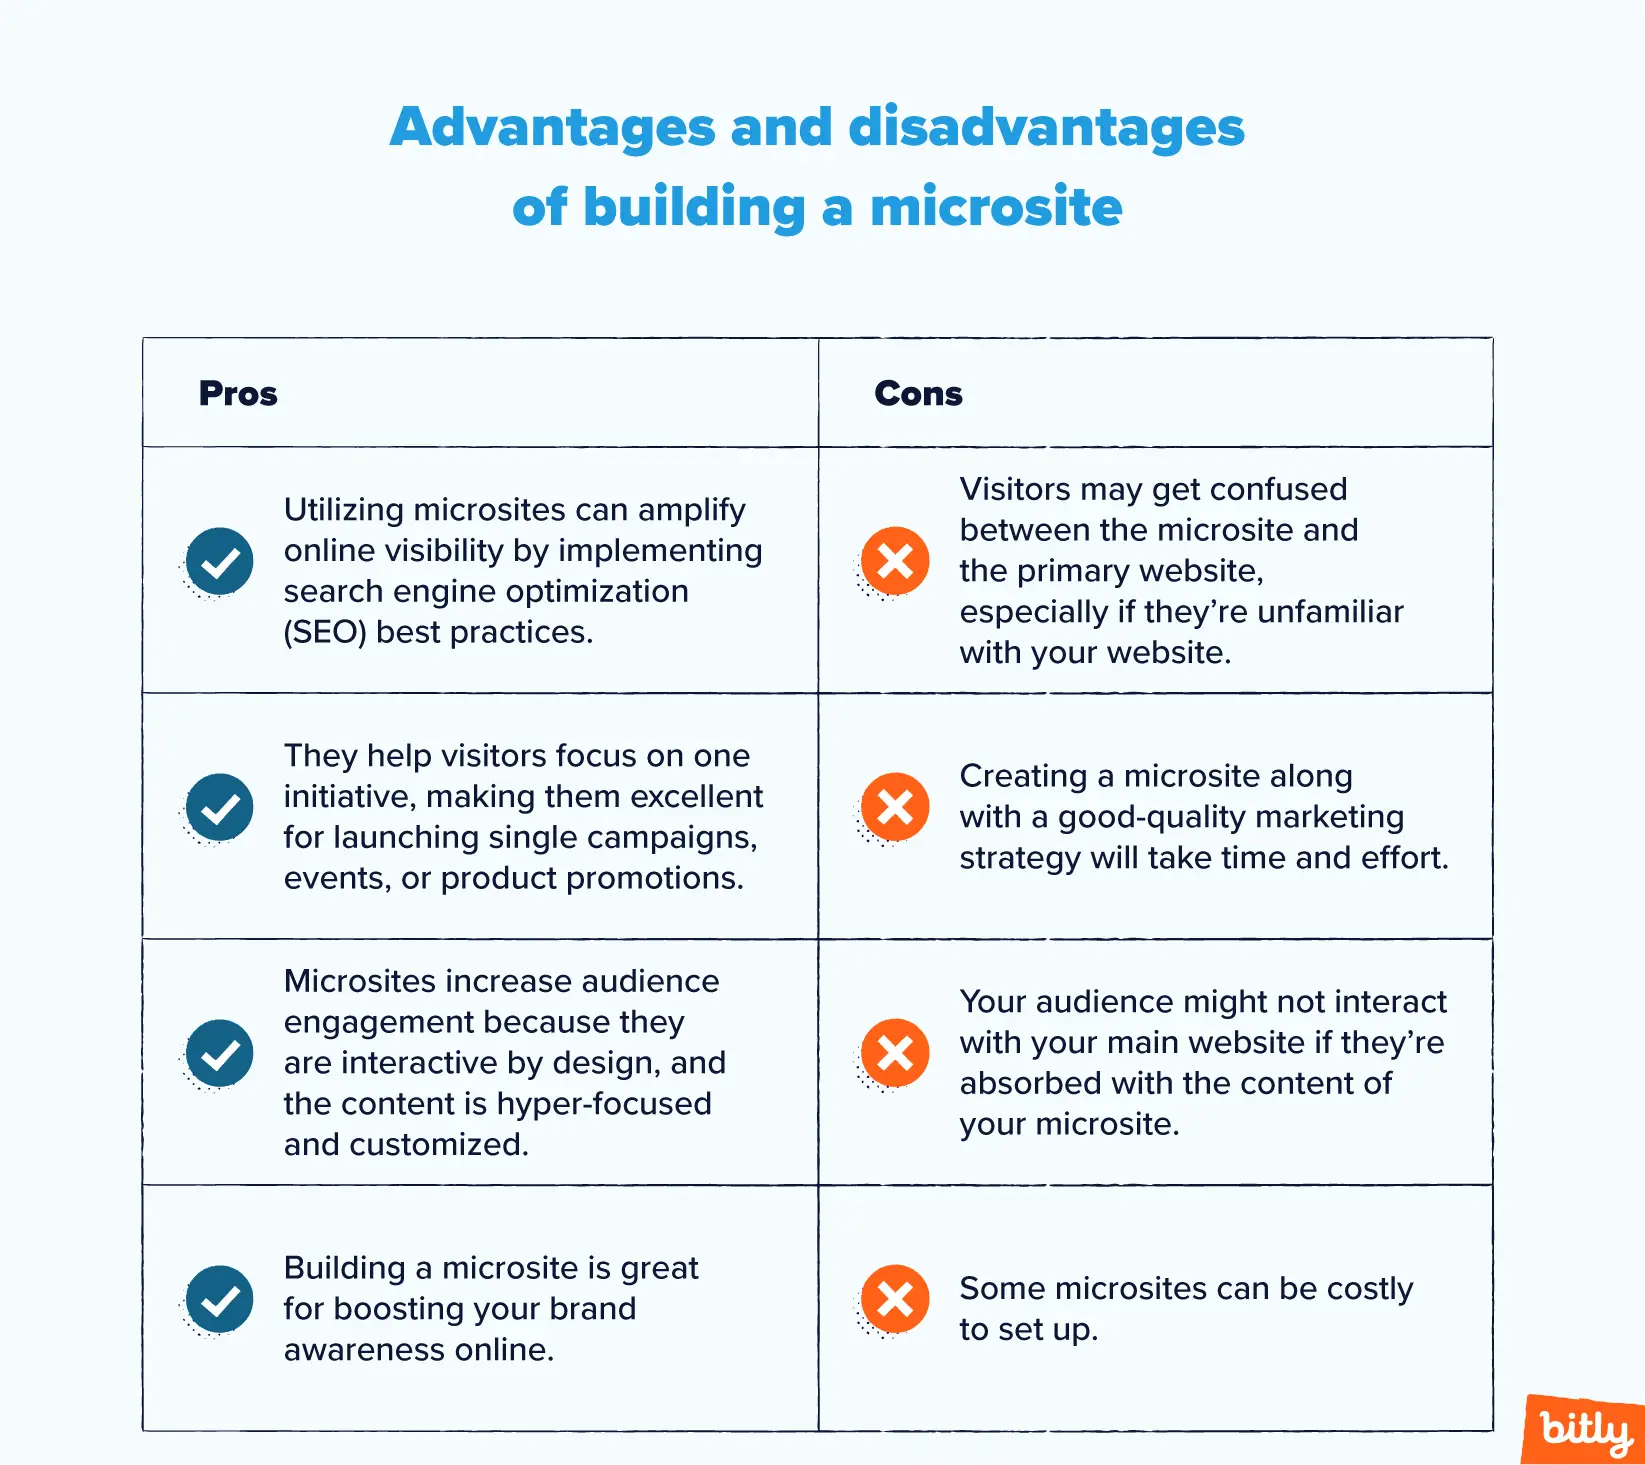 A chart with the advantages and disadvantages of building a microsite.